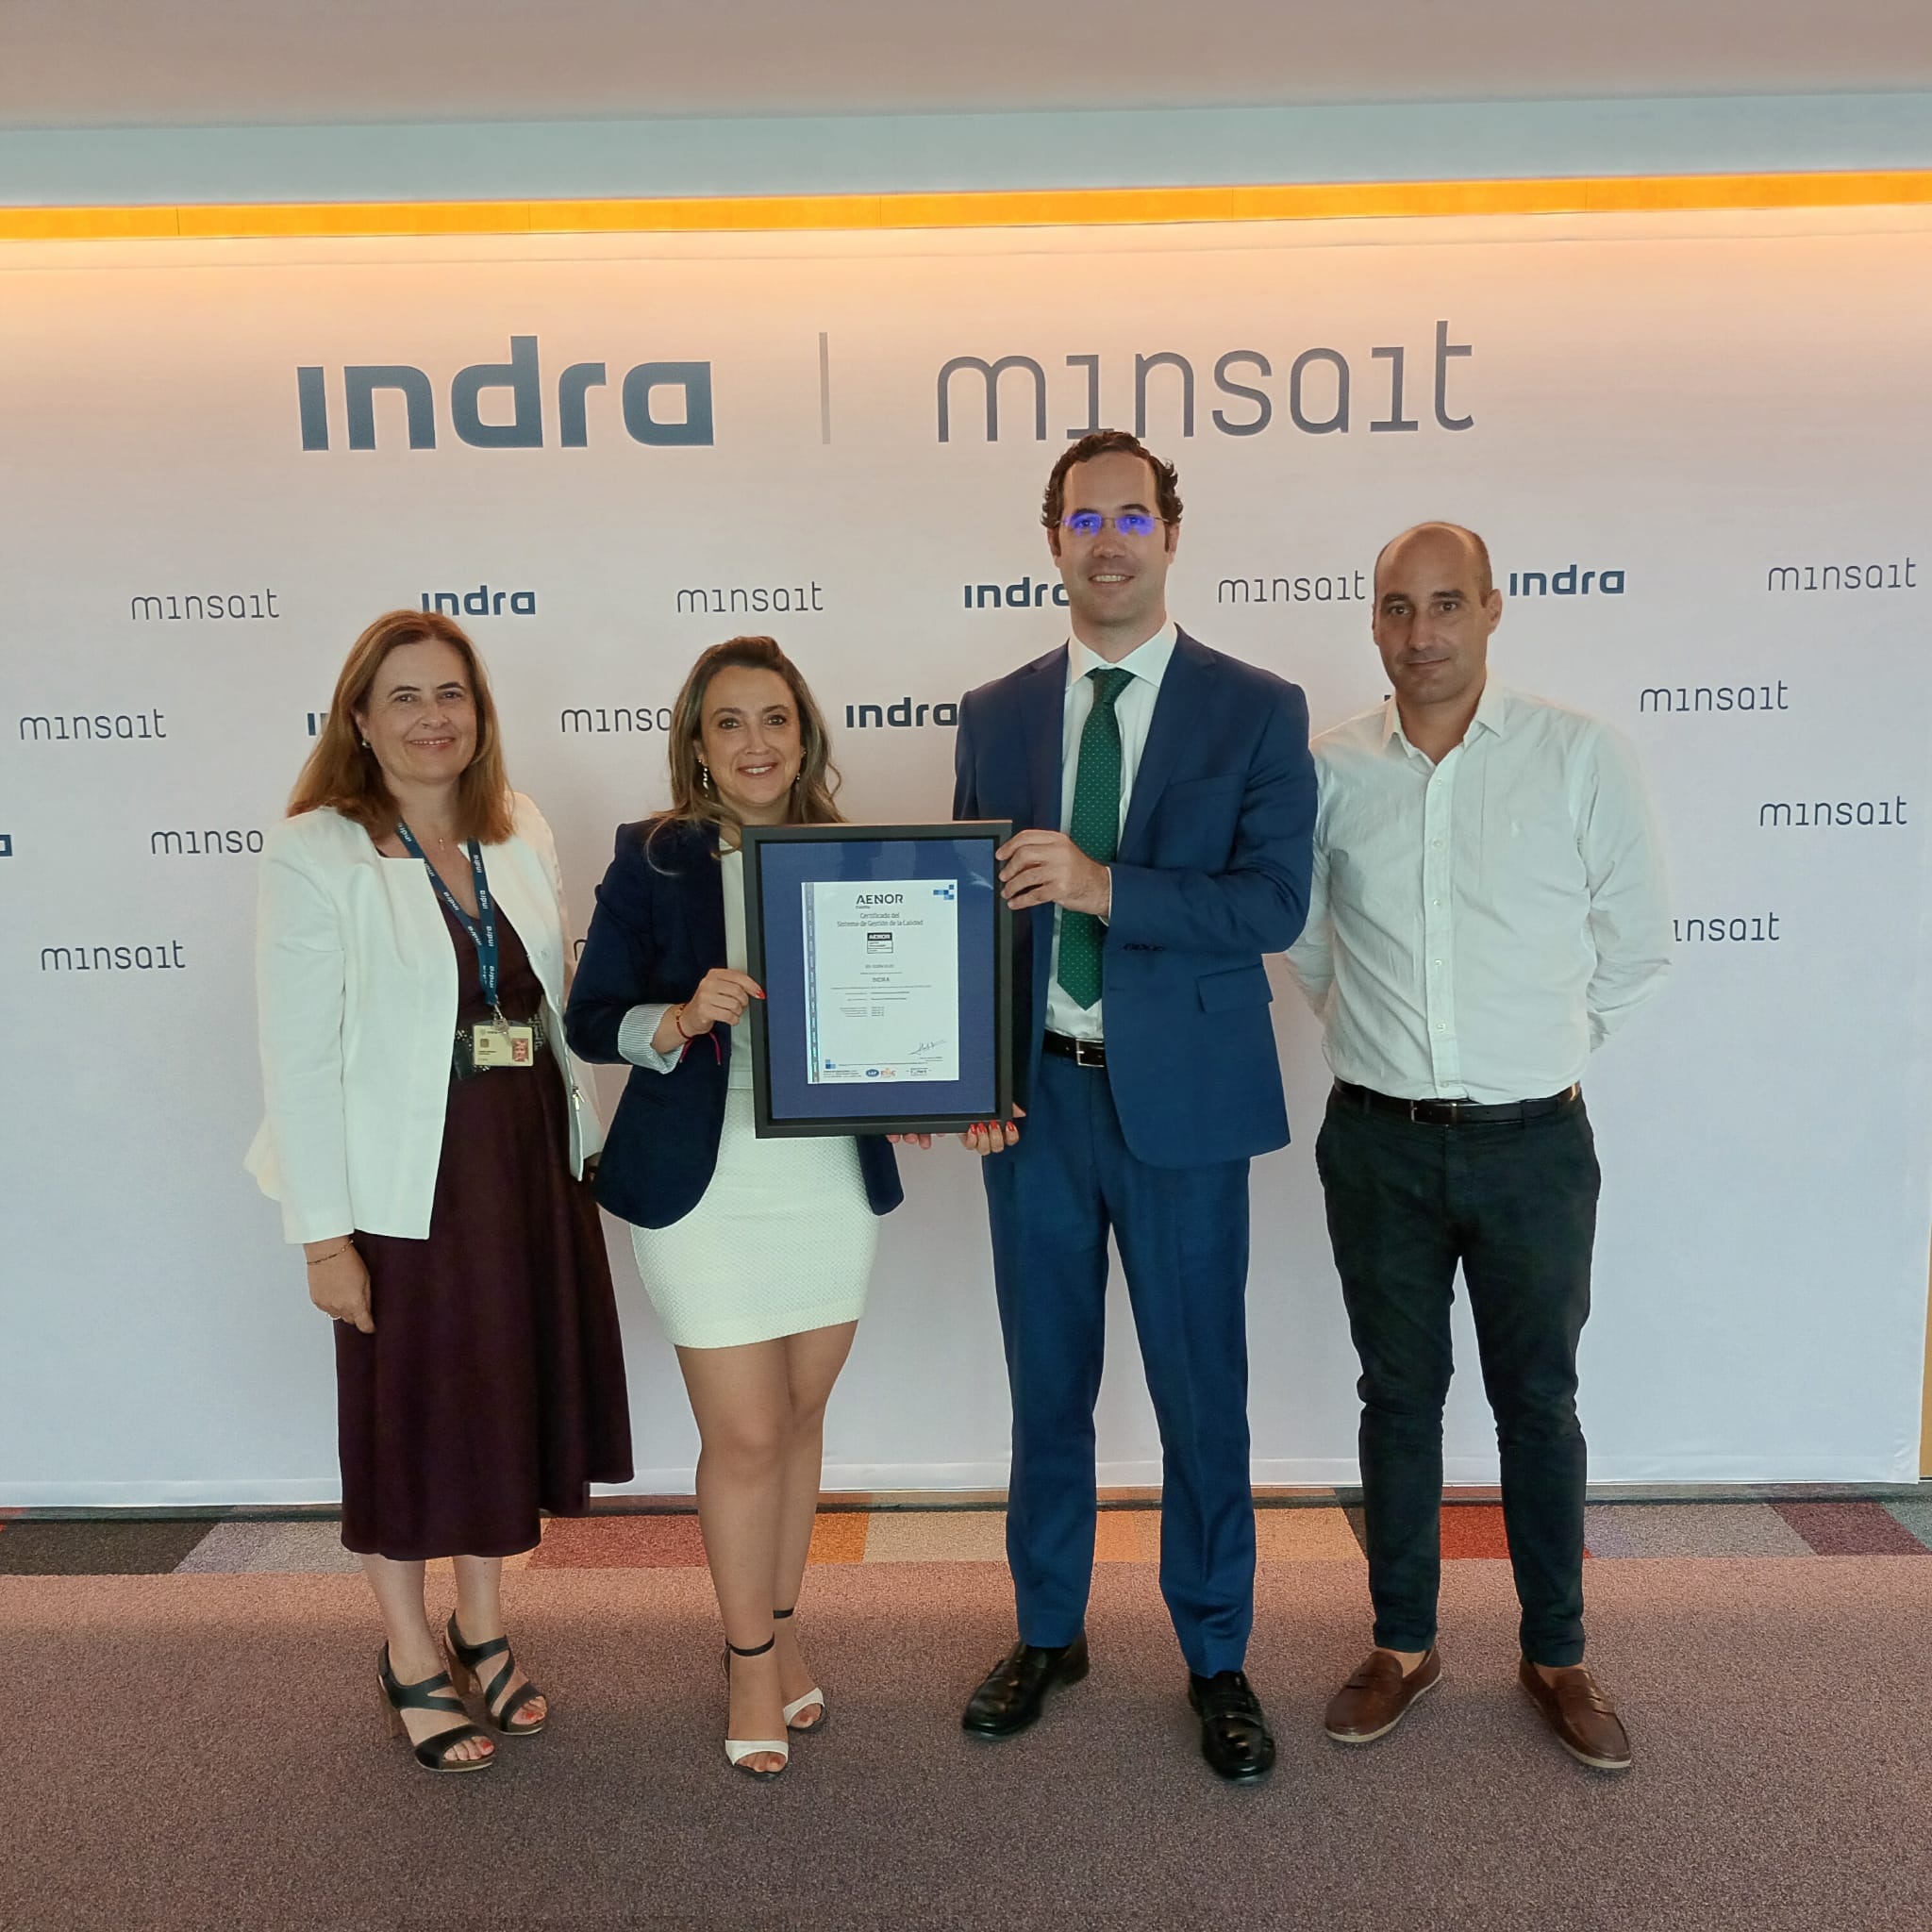 Indra renews its global quality certificate and expands its coverage to 16 countries